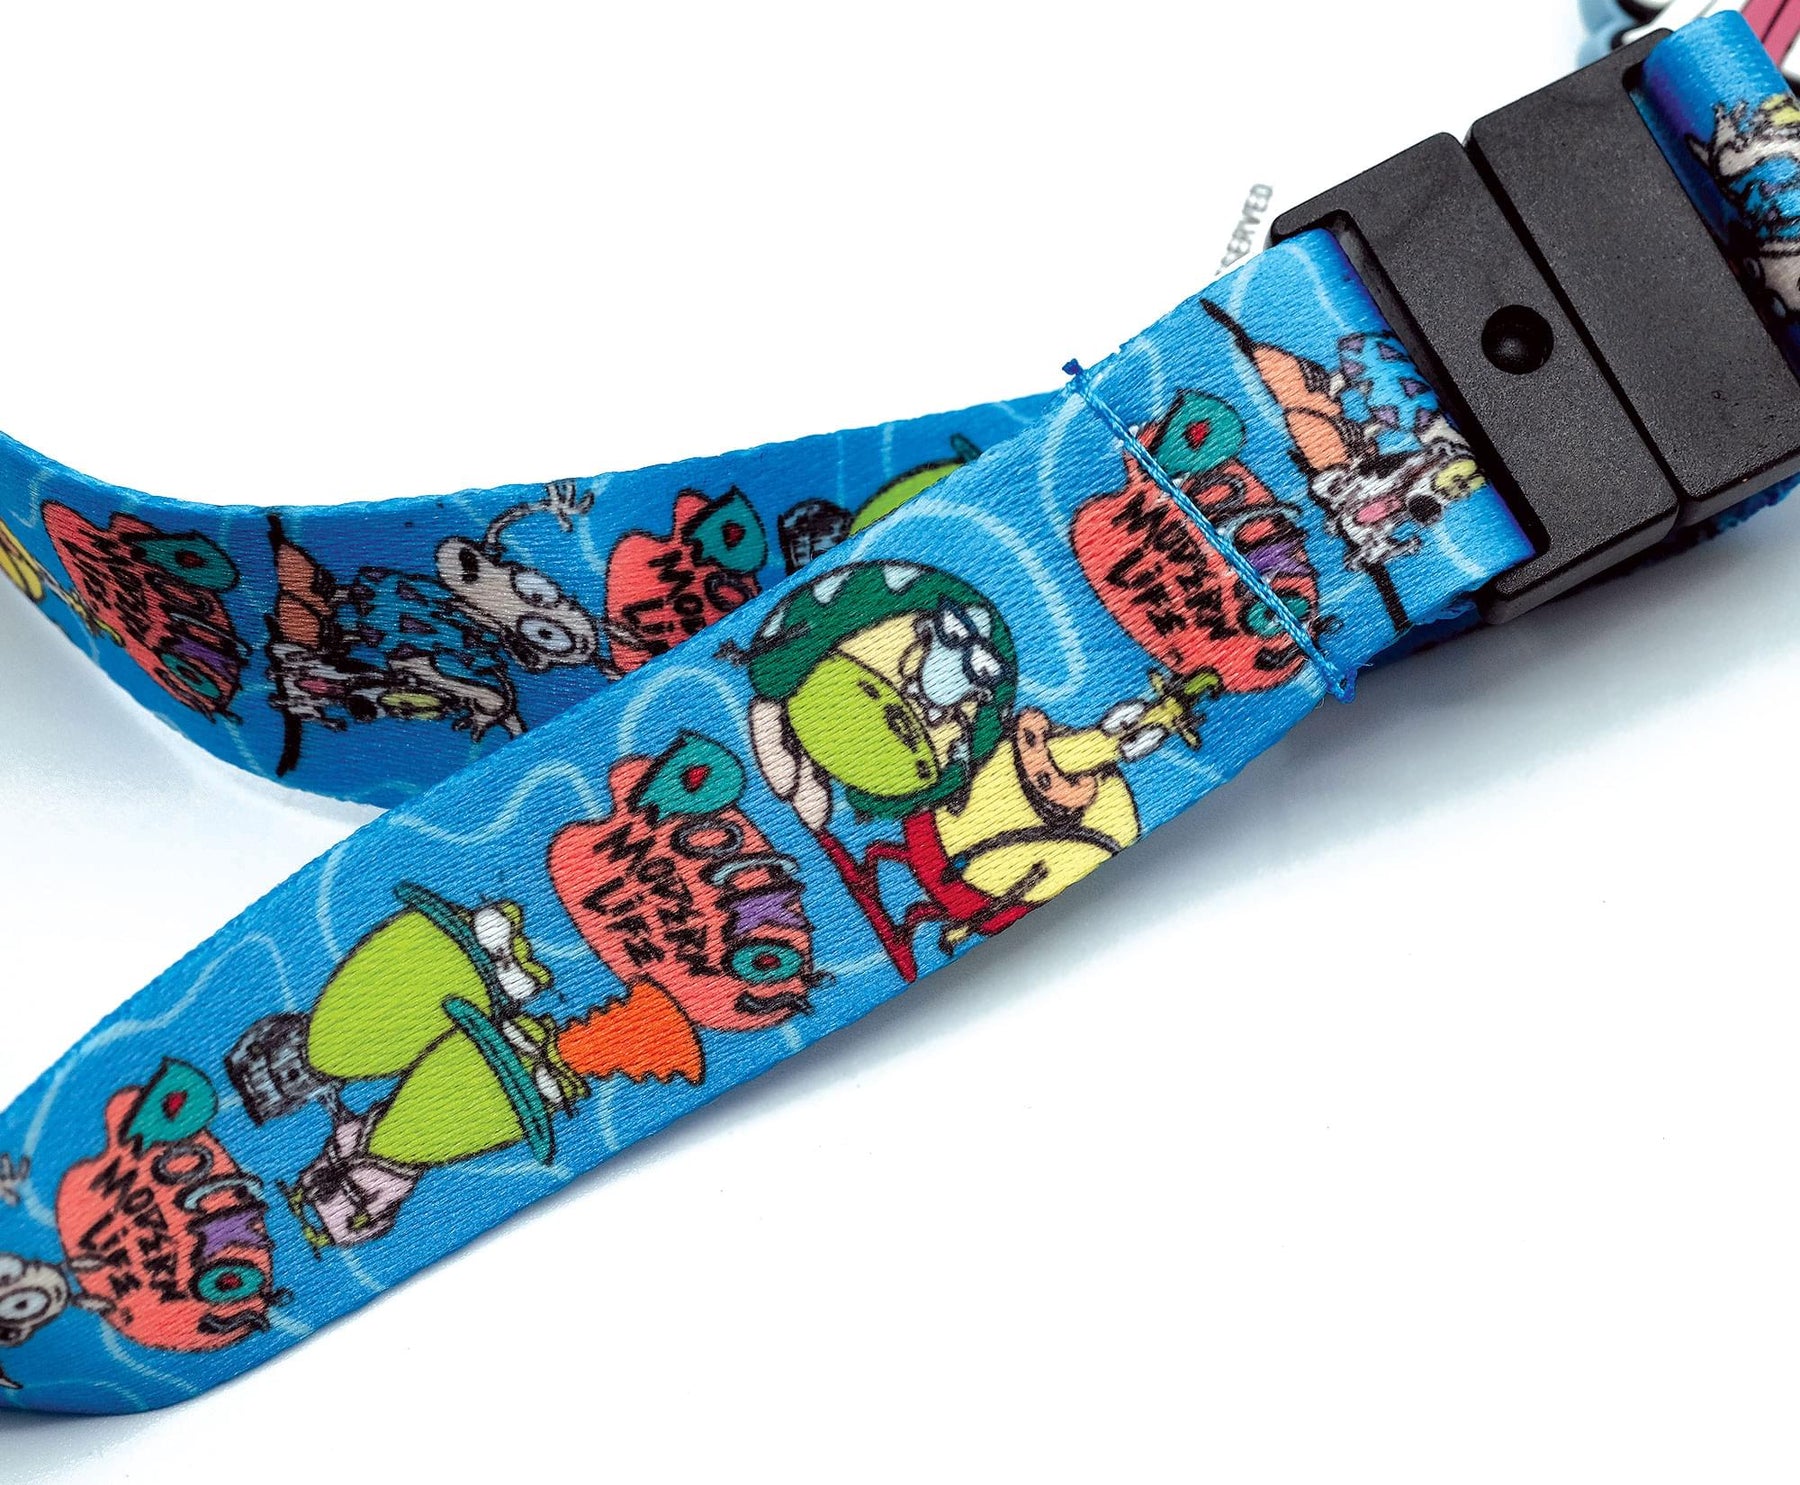 Nickelodeon Rocko's Modern Life Lanyard With ID Badge Holder And Removable Charm